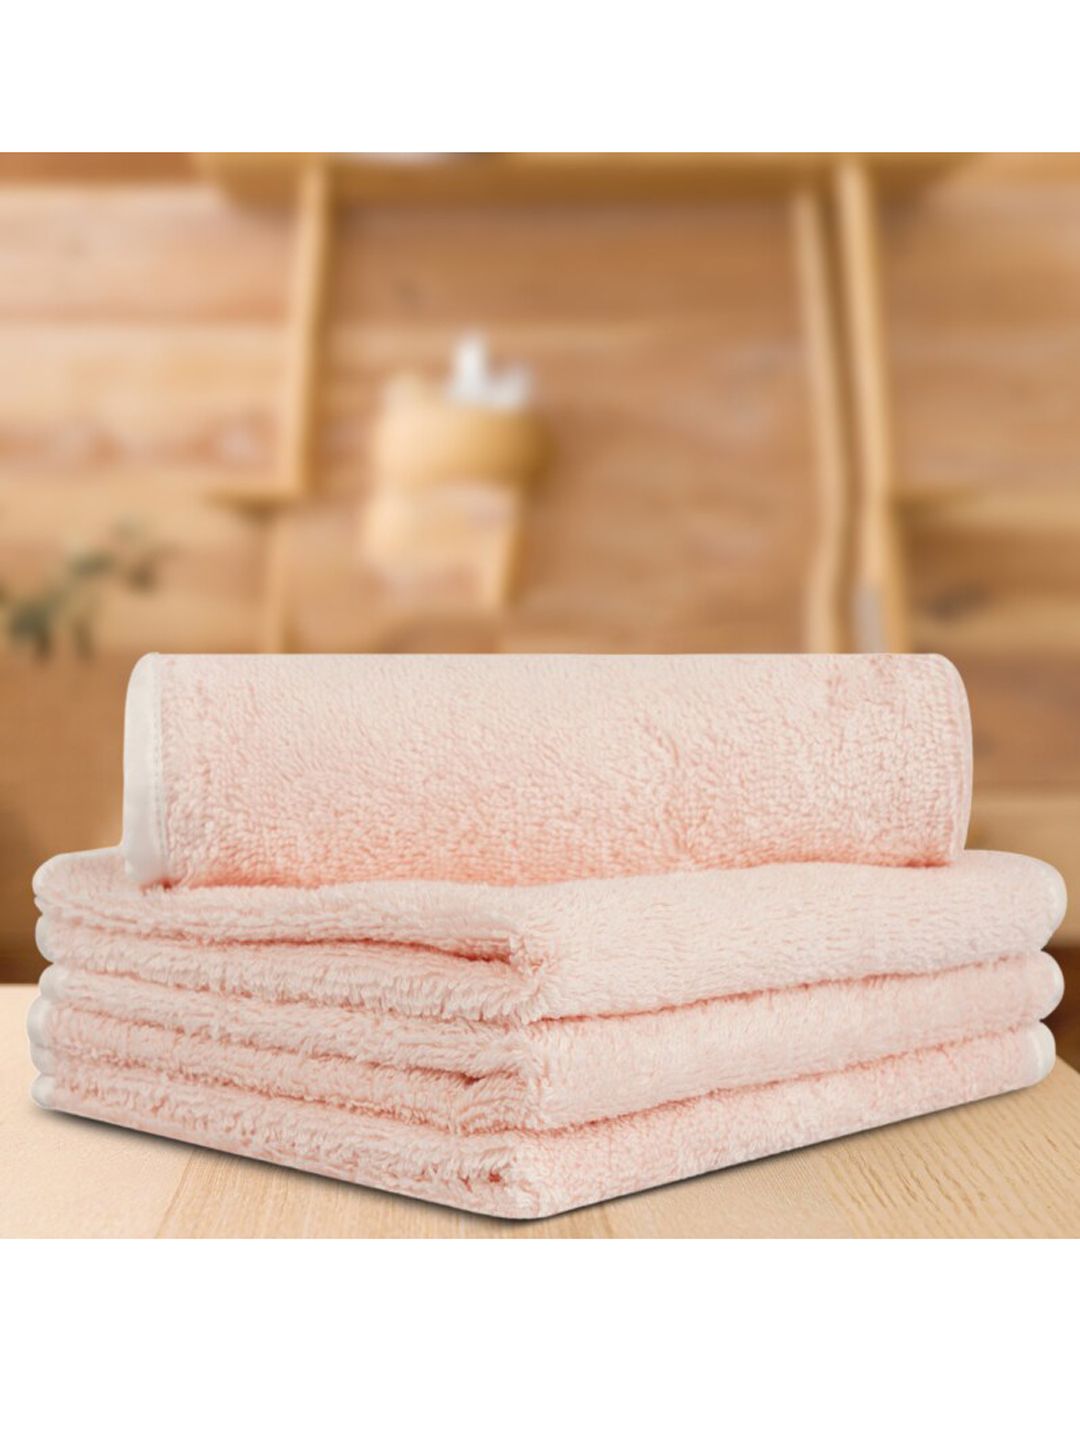 LUSH & BEYOND Set Of 4 500 GSM Pure Cotton Face Towels Price in India